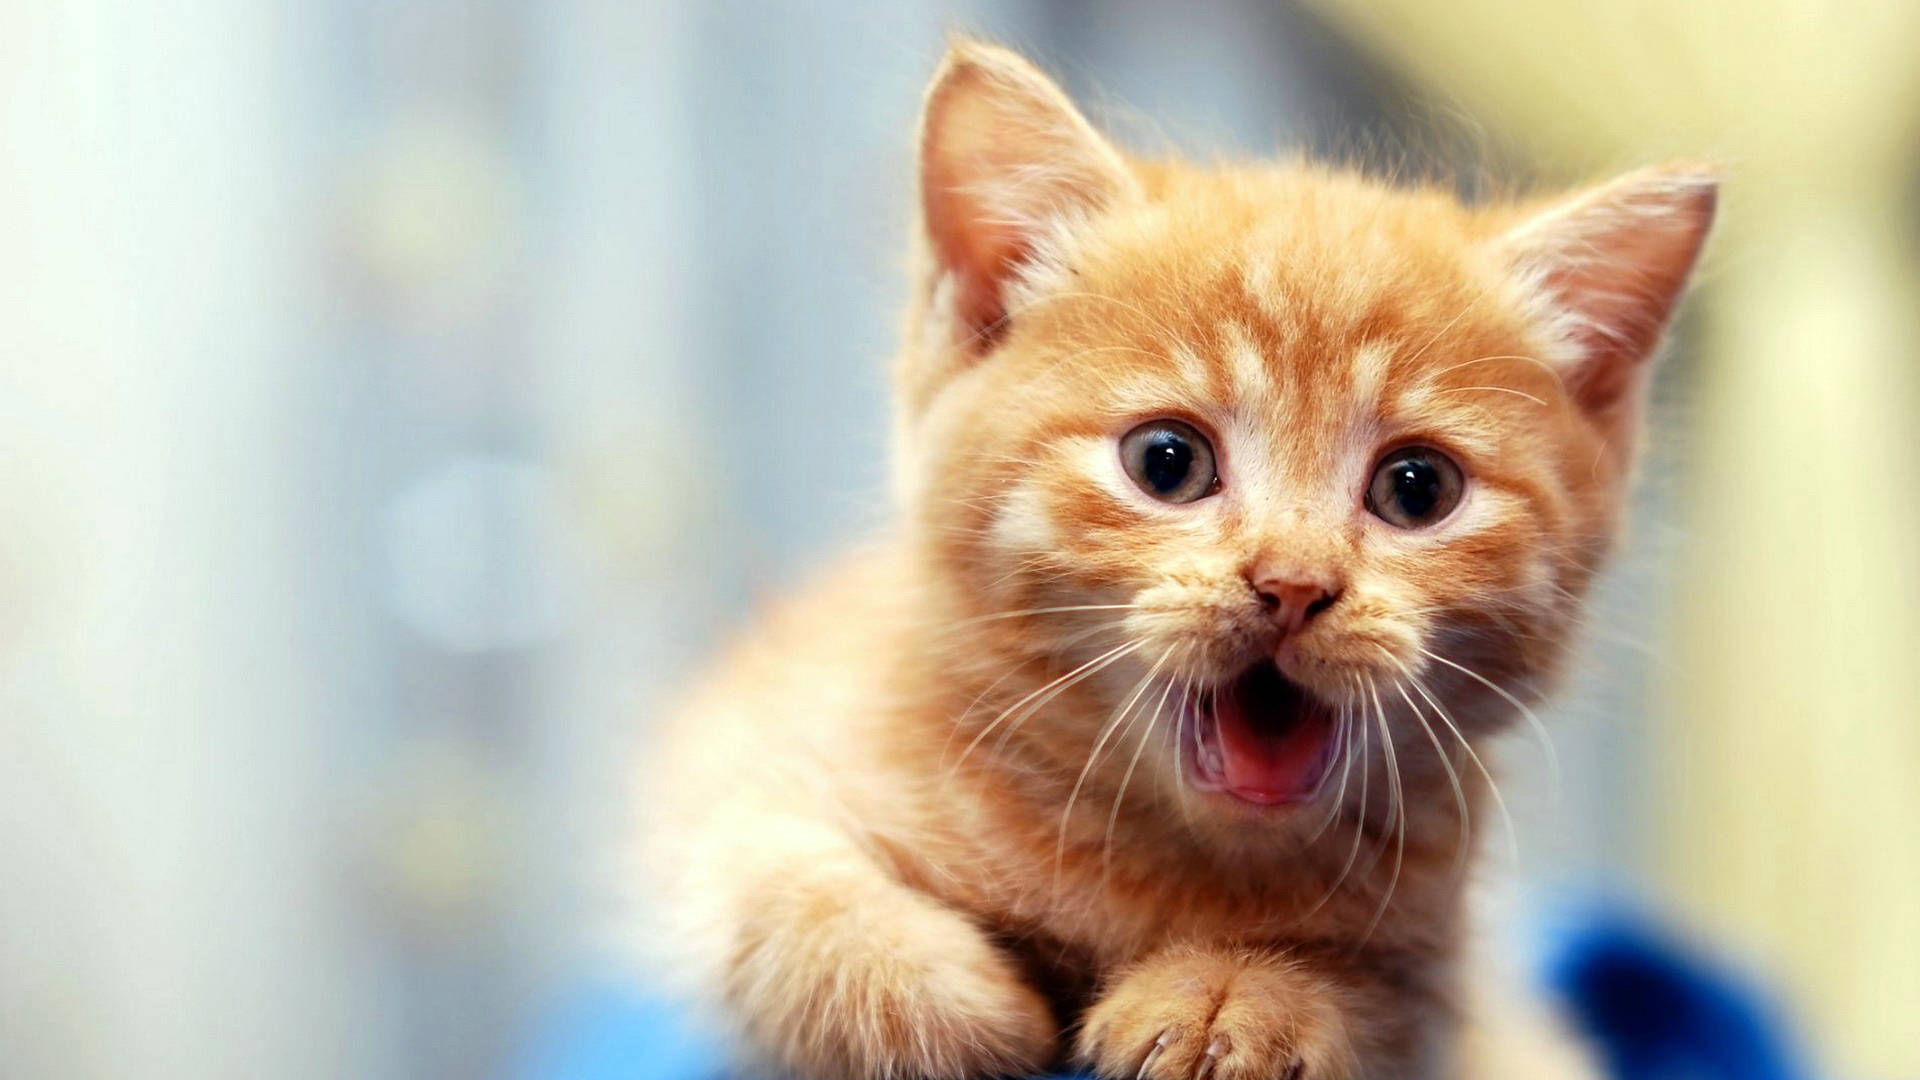 Cute Kitten With Mouth Open